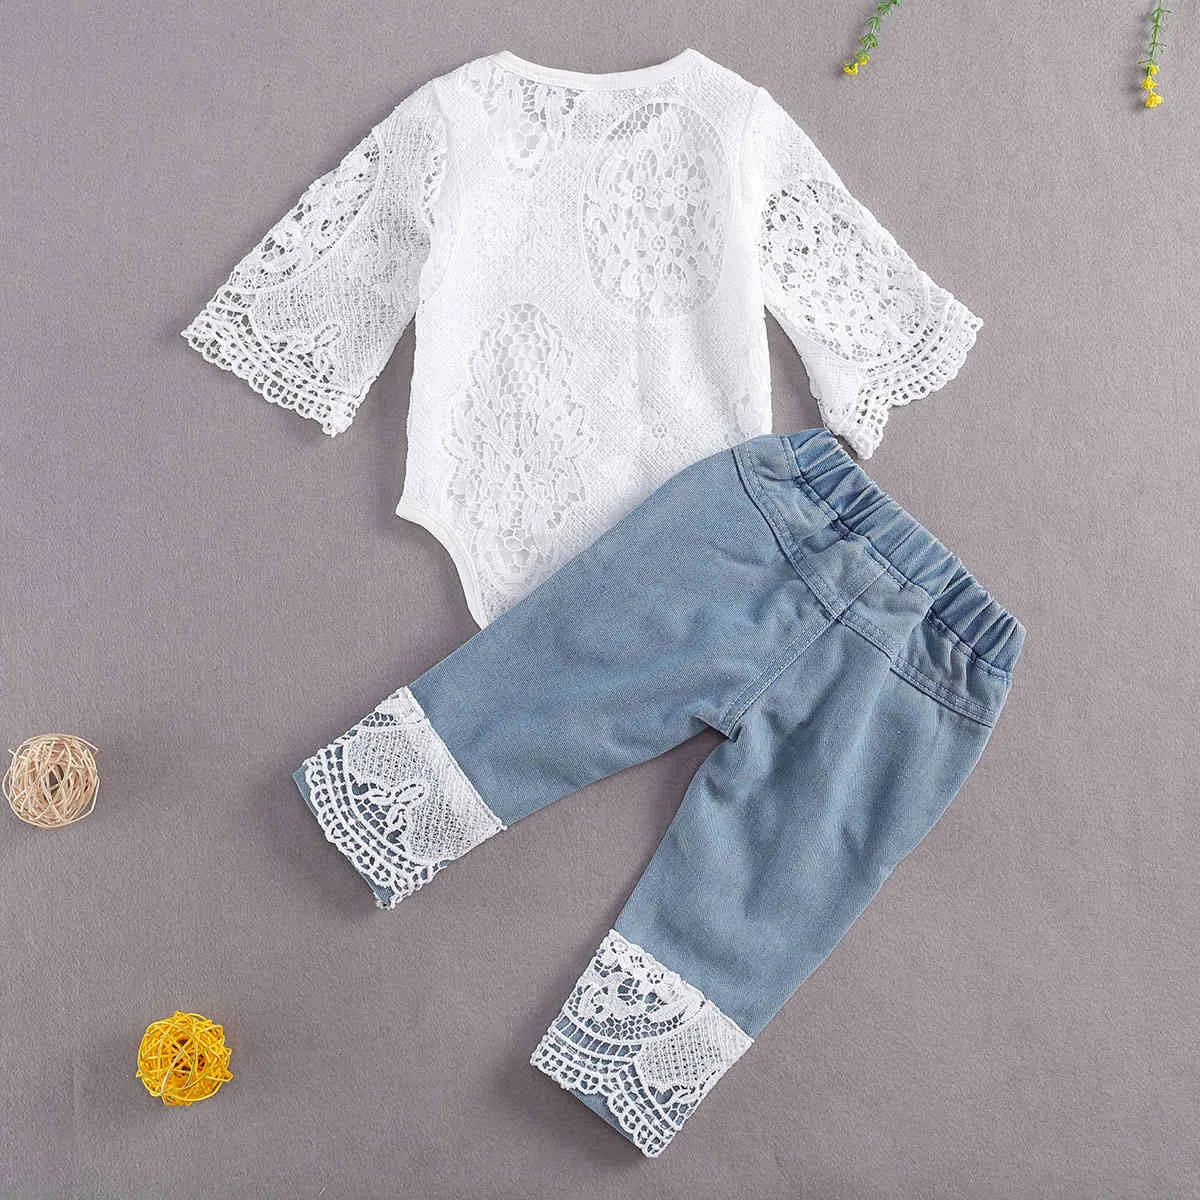 0-24M born Infant Baby Girls Clothes Set Lace White Romper Denim Pants Autumn Girl Outfits Clothing 210515